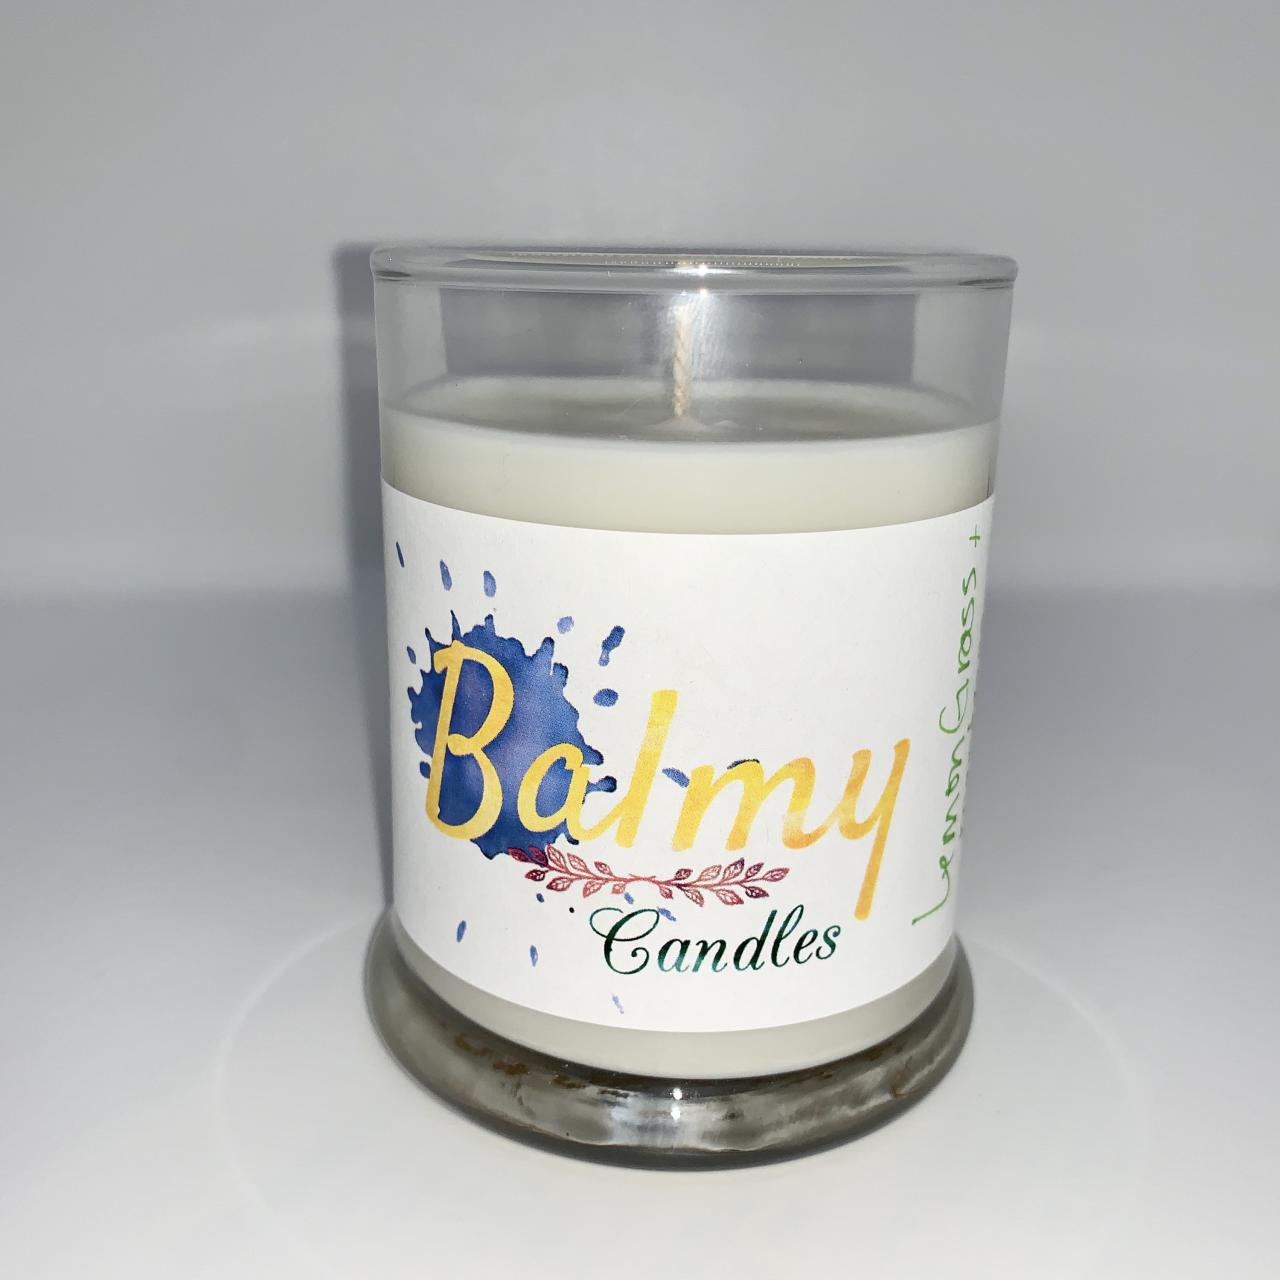 Lemongrass + Tangerine Scent Soy Wax Candle